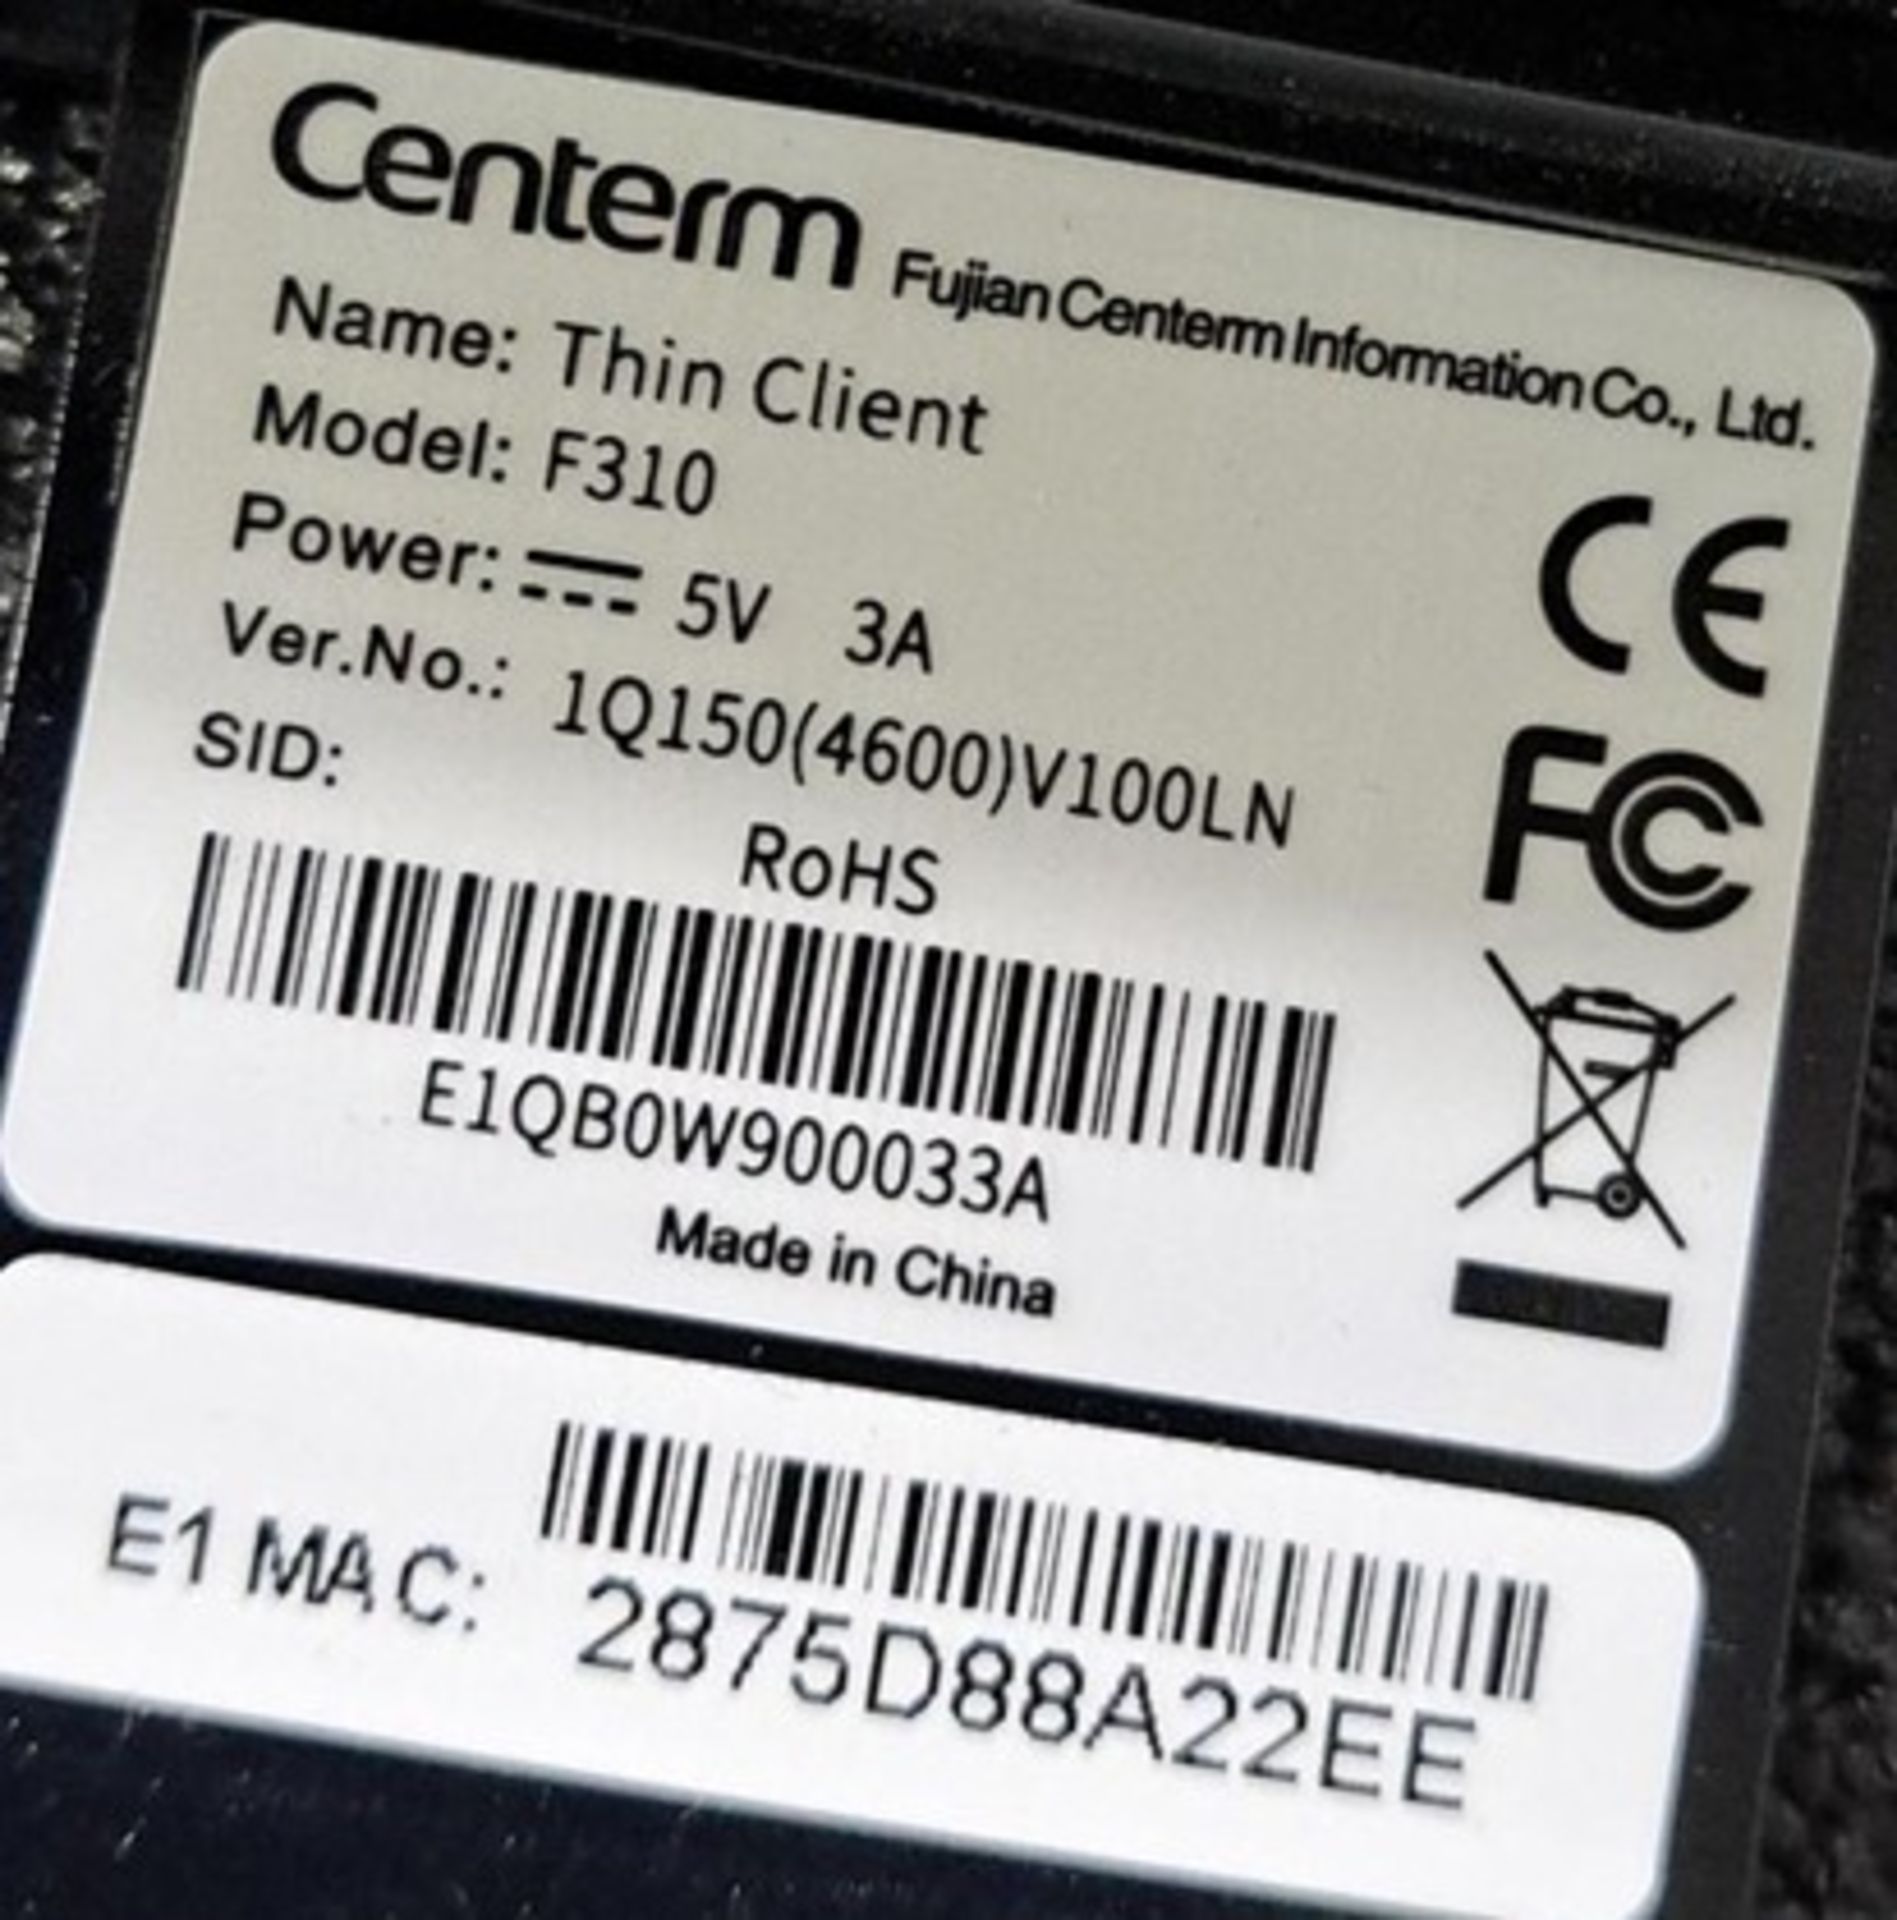 (New equipment) Lot of 2 Thin client containing: 1 Centerm Thin client, F310 Model, SN; Includes 22 - Image 2 of 3